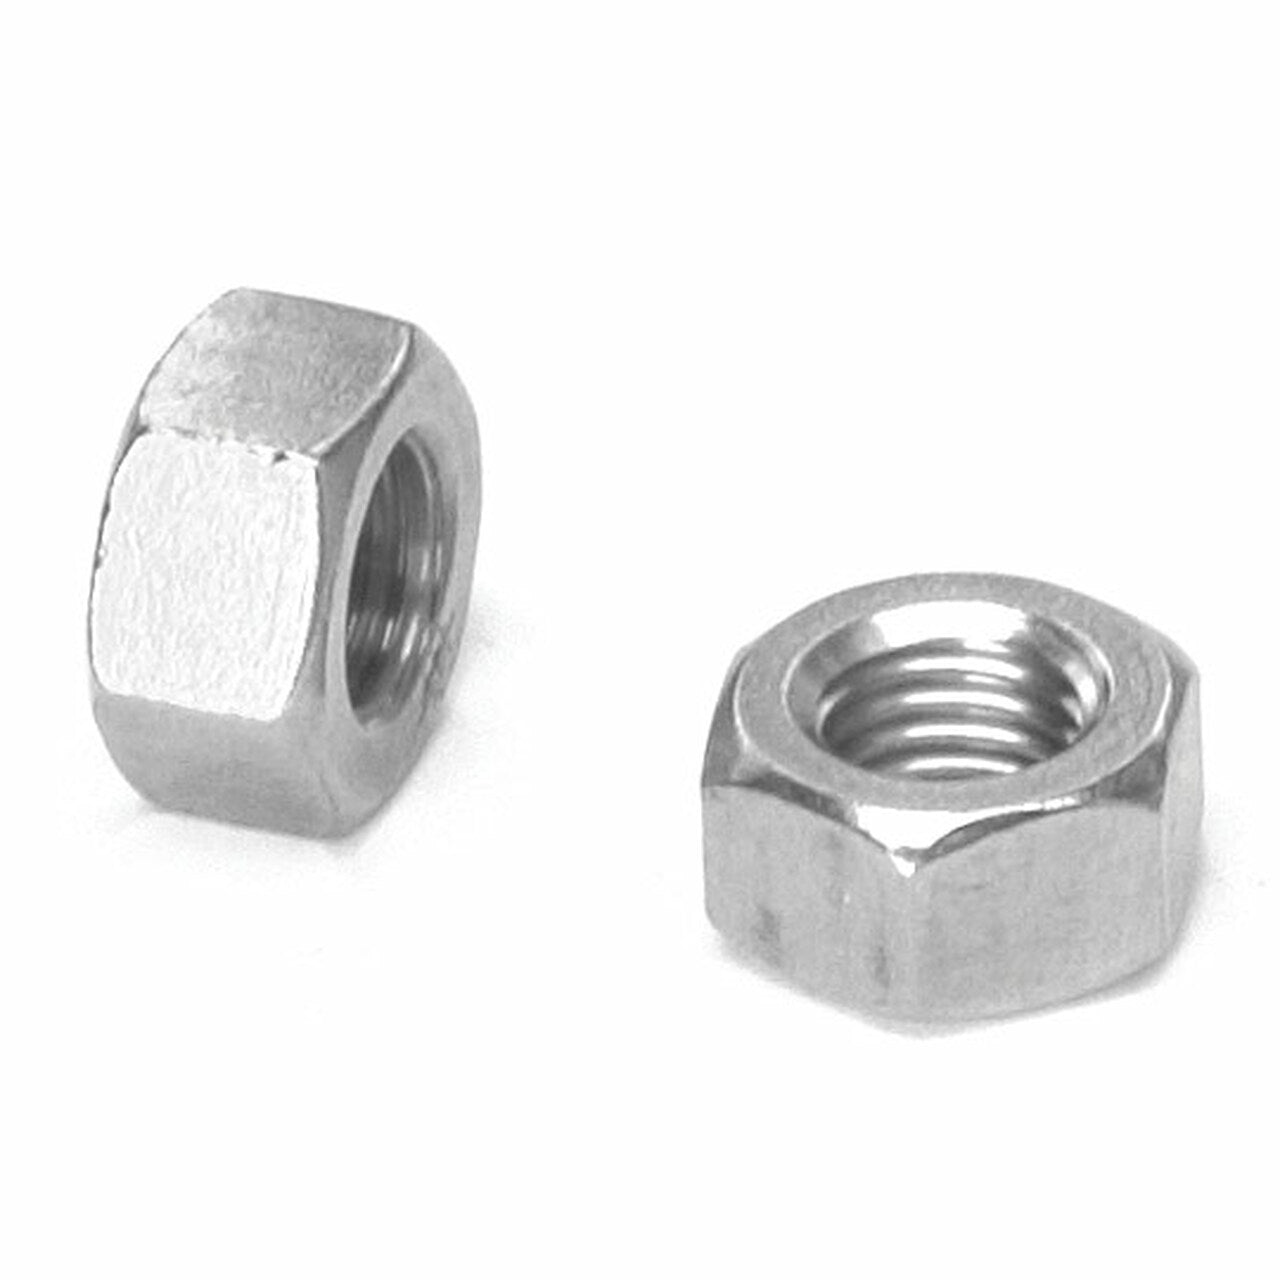 Standard Fasteners - 304 Stainless Steel Nuts, Part No. 1/4-20